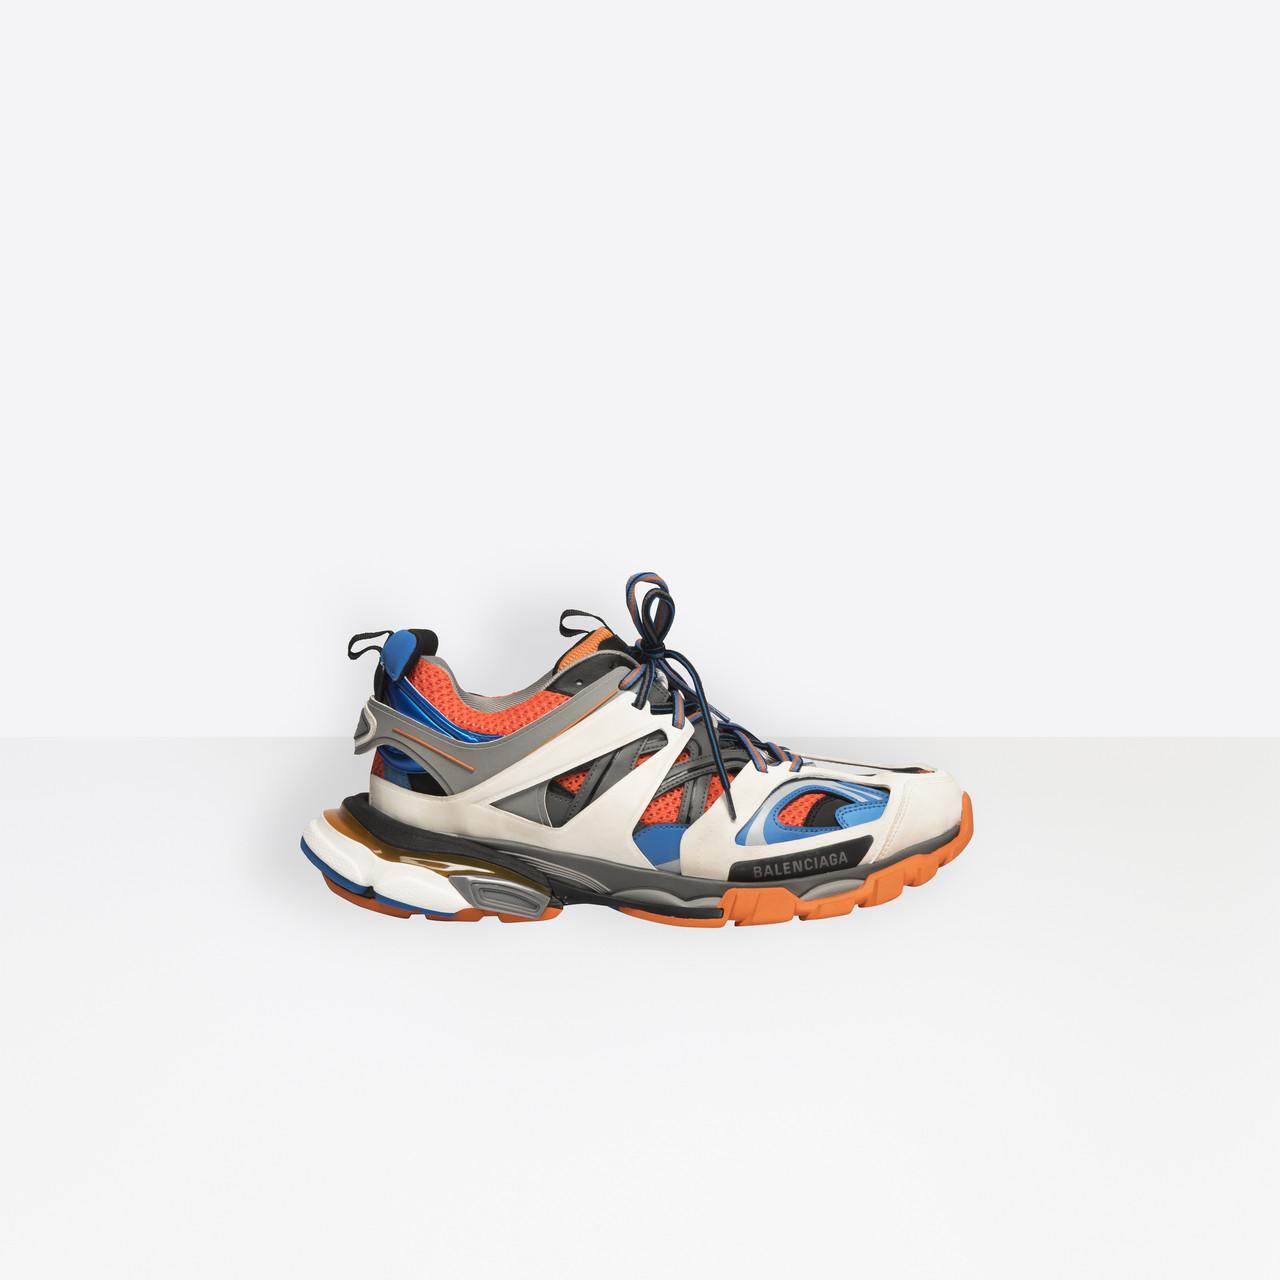 Balenciaga Synthetic Track Trainers in Orange for Men - Lyst